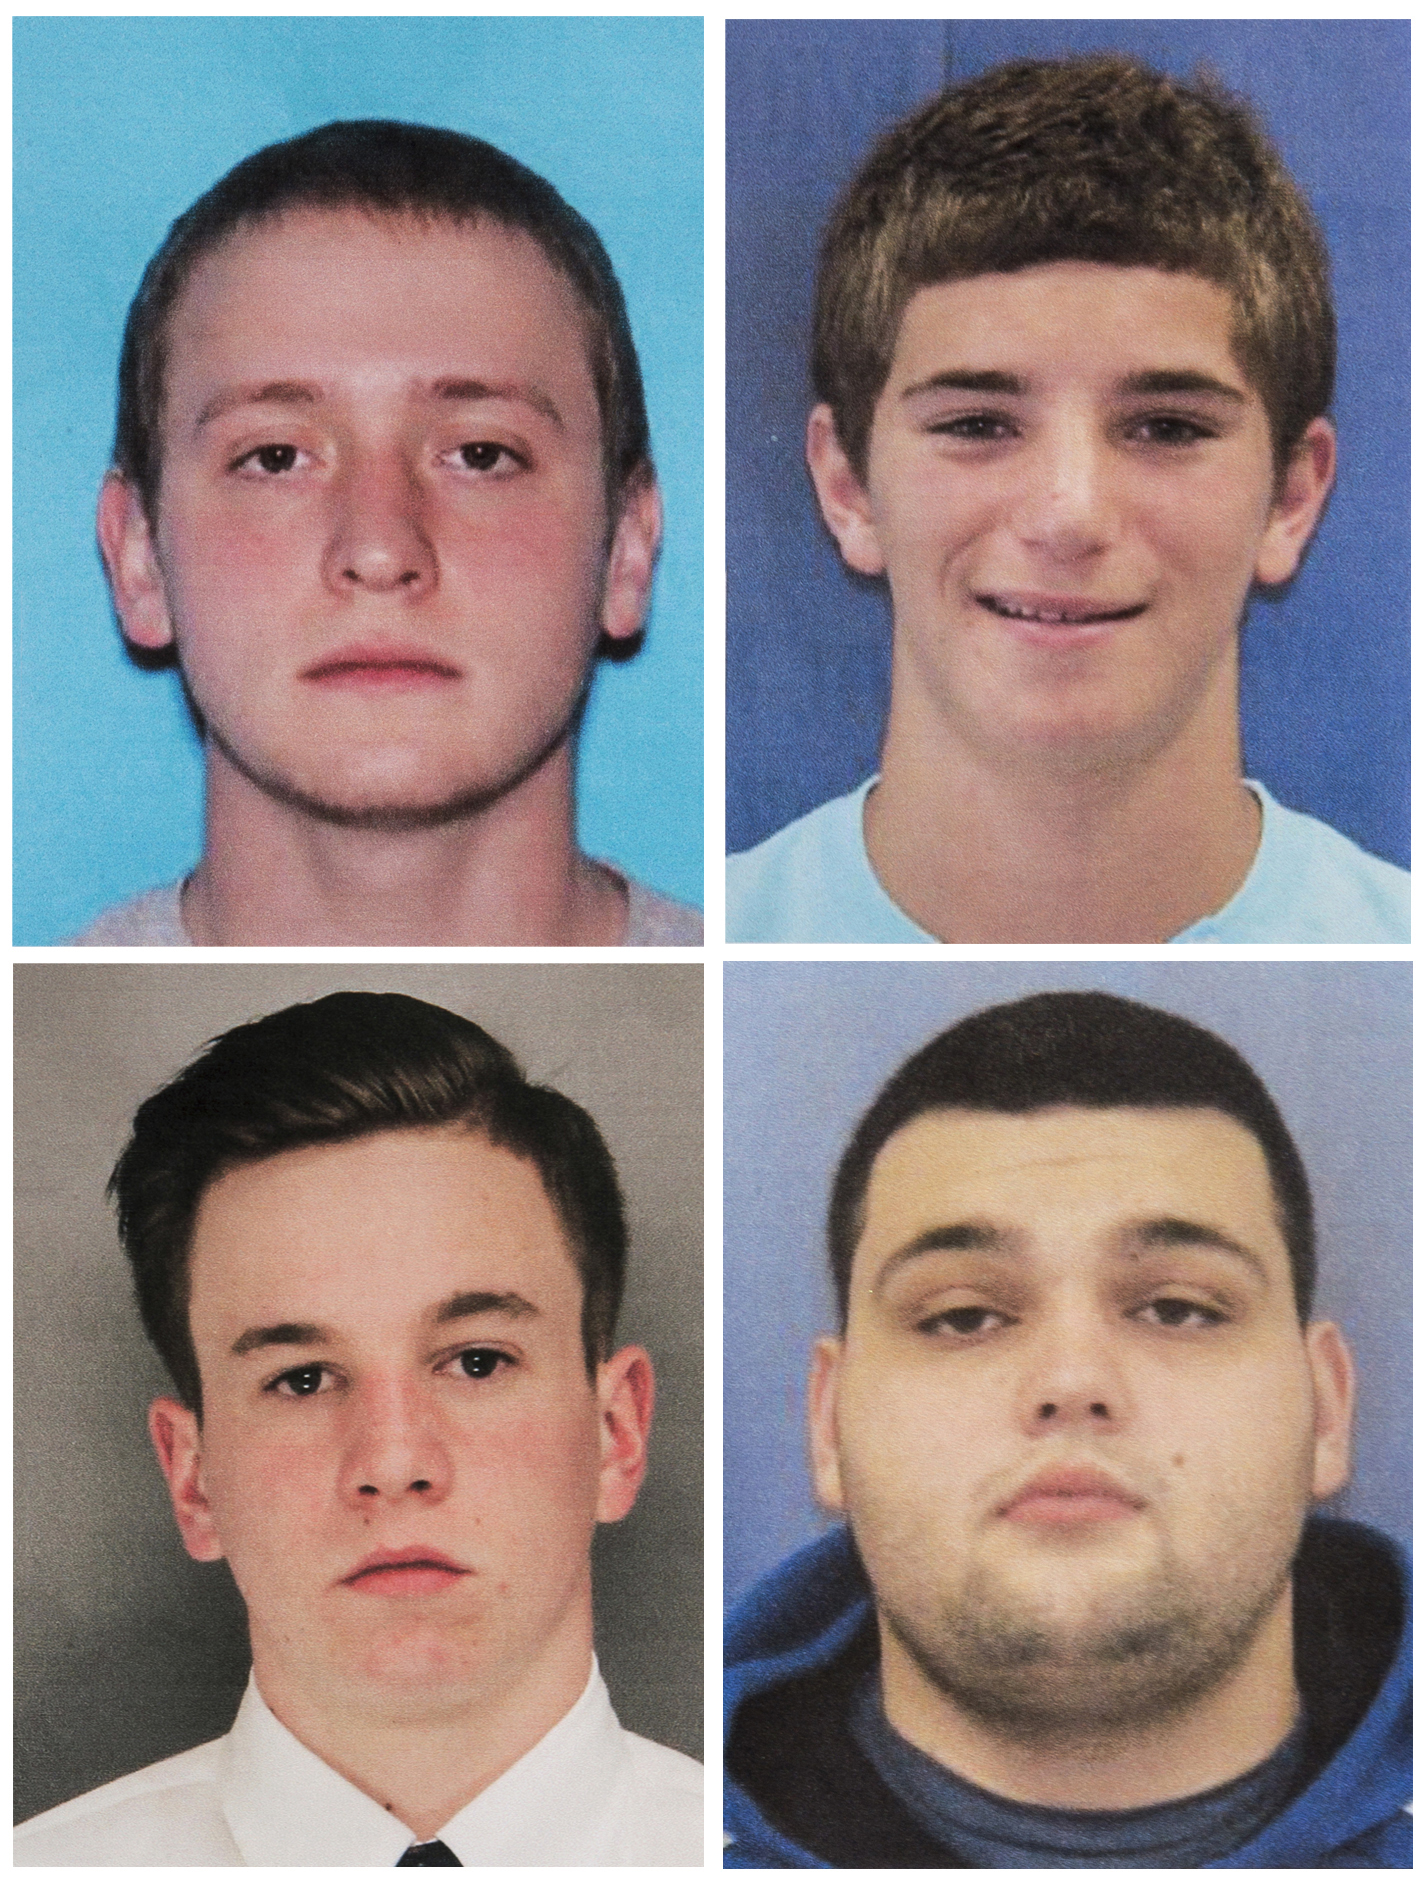 PHOTO: Bucks County District Attorney's Office photos show L-R, top row: Dean Finocchiaro, 18, Tom Meo, 21, Jimi Patrick, 19 and Mark Sturgis, 22, four men who went missing on a sprawling farm in Bucks County, about 40 miles north of Philadelphia.